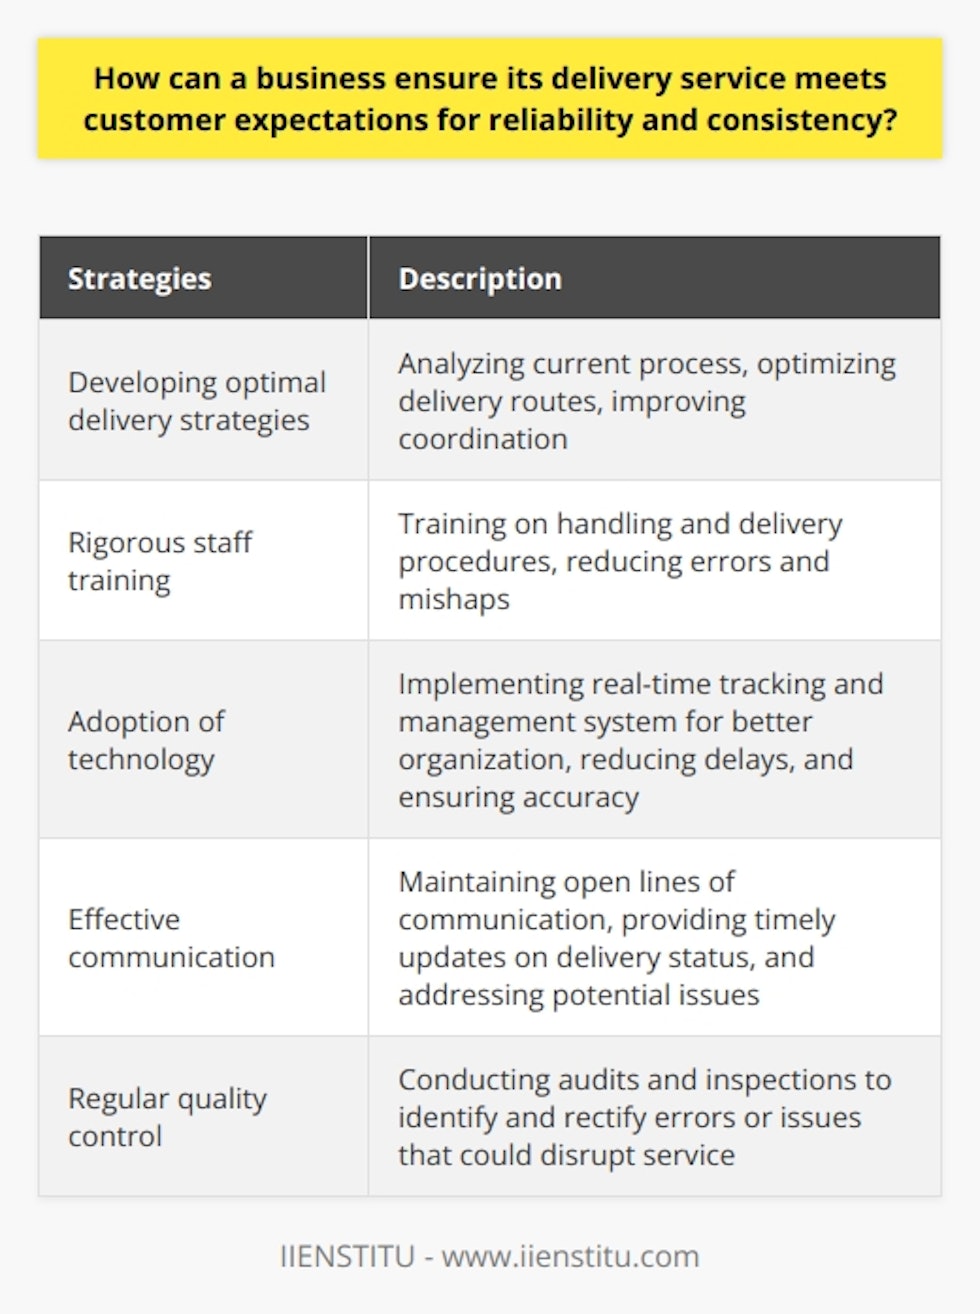 A business can ensure its delivery service meets customer expectations for reliability and consistency through various strategies. These include developing optimal delivery strategies, rigorous staff training, adoption of technology, effective communication, and quality control.Firstly, a business should regularly assess its delivery system to identify areas that need improvement. By analyzing the current process, the business can identify bottlenecks or inefficiencies and make the necessary changes to enhance service efficiency. This could involve optimizing delivery routes, improving coordination between delivery personnel, or implementing new technology to streamline the process.Thorough staff training is crucial in ensuring reliable and consistent delivery. Delivery personnel should be trained on appropriate handling and delivery procedures to reduce errors or mishaps that could compromise customer satisfaction. By upskilling the staff, businesses can ensure that deliveries are made on time and in good condition, meeting customer expectations.The adoption of technology can significantly enhance delivery service reliability. Implementing a real-time tracking and management system allows businesses to monitor and manage deliveries more effectively. This technology enables better organization, reduces delays, and ensures delivery accuracy. By leveraging technology, businesses can provide customers with real-time updates on their delivery status, improving transparency and trust.Effective communication with customers is essential to managing their expectations. Maintaining open lines of communication and providing timely updates on delivery status can minimize misunderstandings and increase customer satisfaction. Customers should be promptly informed of any potential delays or issues, allowing them to plan accordingly and providing reassurance that their needs are being prioritized.Regular quality control checks are crucial in maintaining a reliable and consistent delivery service. By conducting periodic audits and inspections, businesses can identify and rectify any errors or issues that could disrupt service. This proactive approach prevents potential service disruption and ensures that customer expectations are consistently met.In conclusion, businesses can ensure that their delivery service meets customer expectations for reliability and consistency through the implementation of optimal delivery strategies, rigorous staff training, adoption of technology, effective communication, and regular quality control. By investing in these areas, businesses can improve and maintain the reliability and consistency of their delivery service, thereby satisfying customer expectations and building trust.